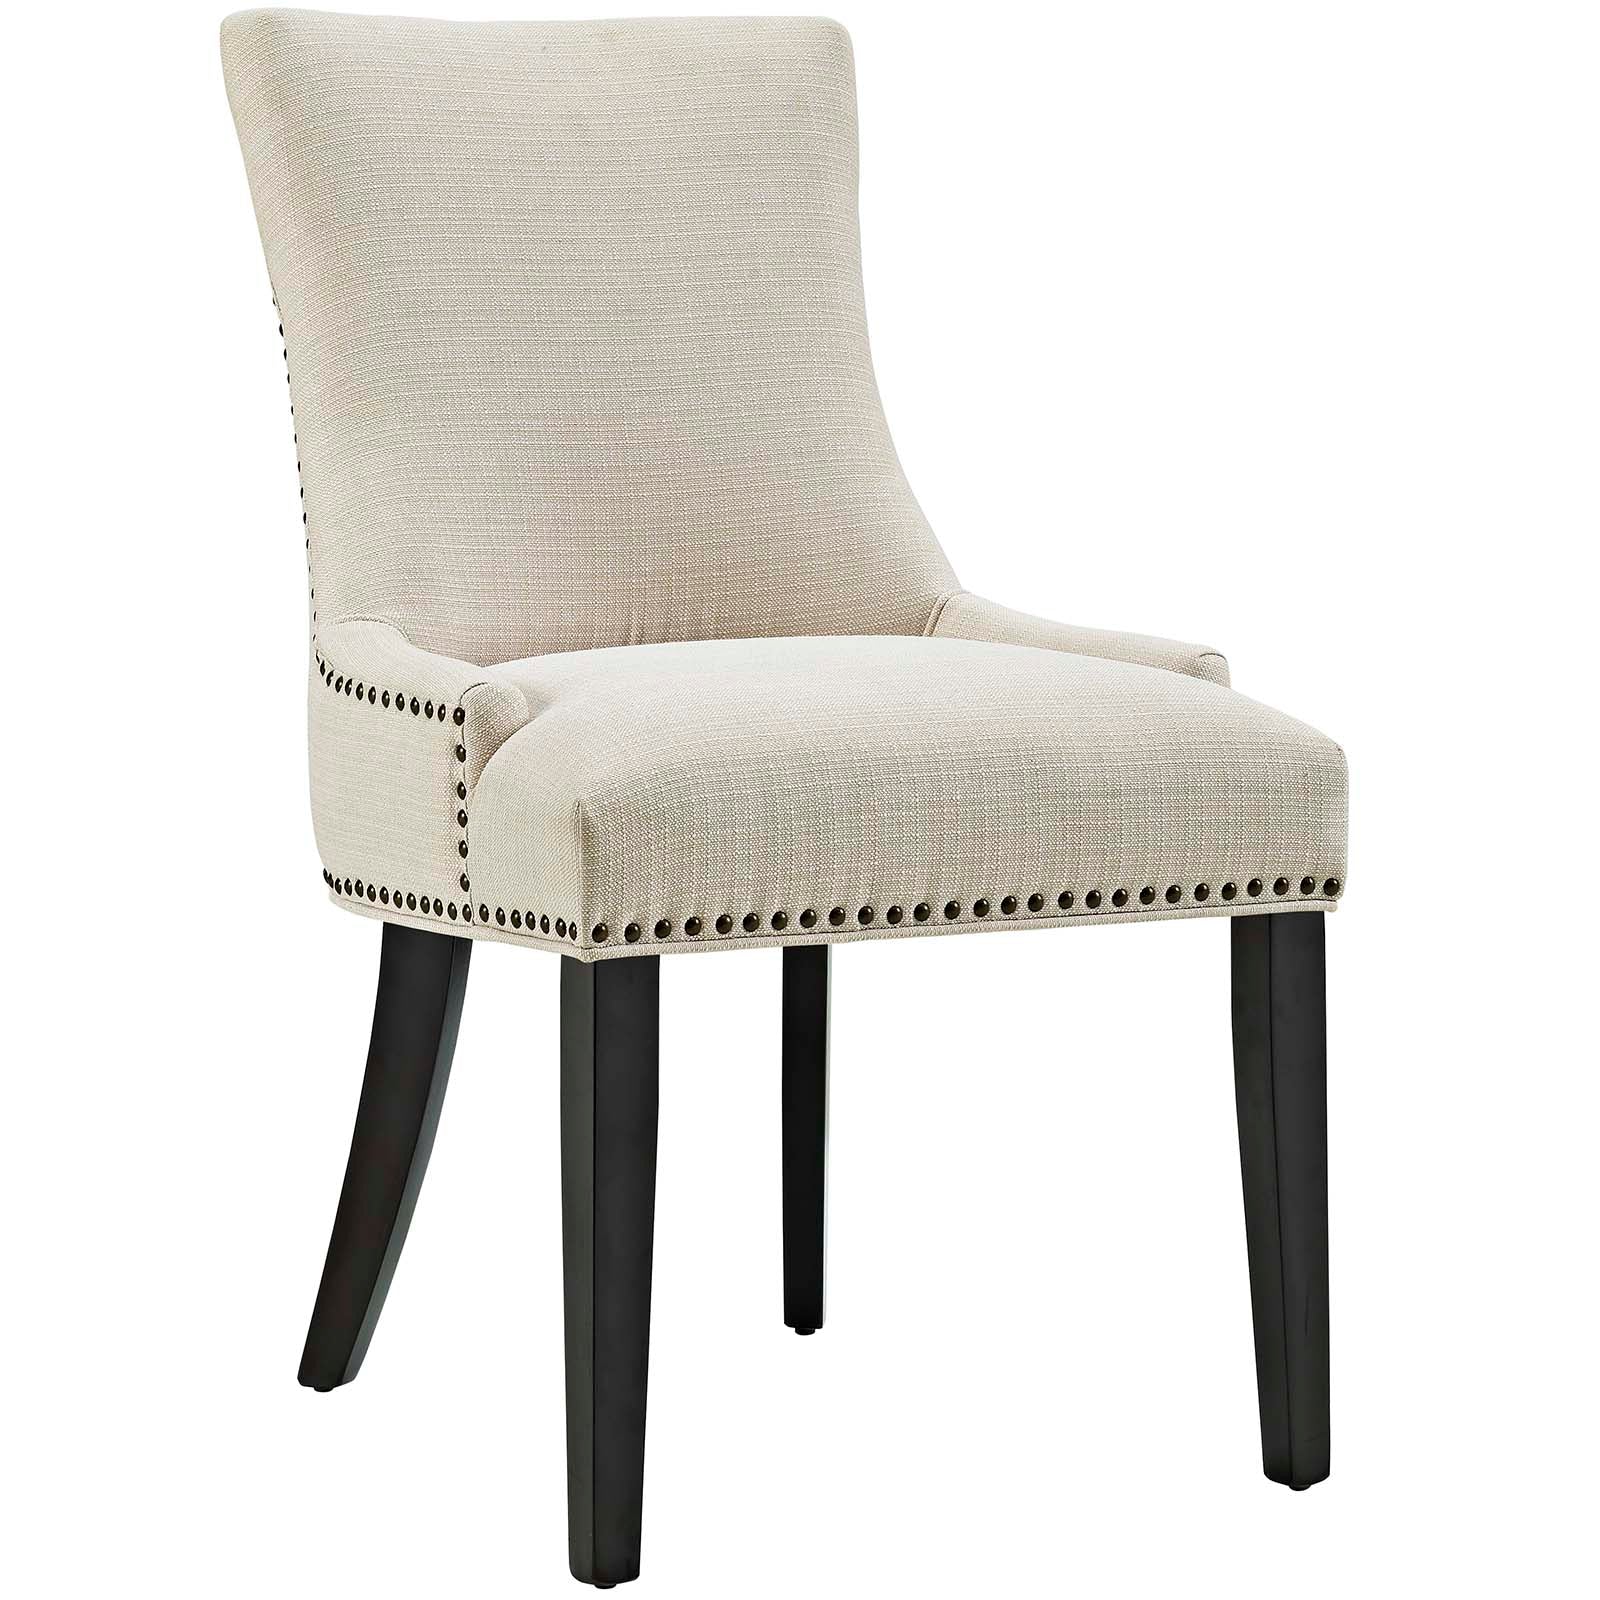 Modway Dining Chairs - Marquis Dining Chair Fabric Beige (Set of 4)